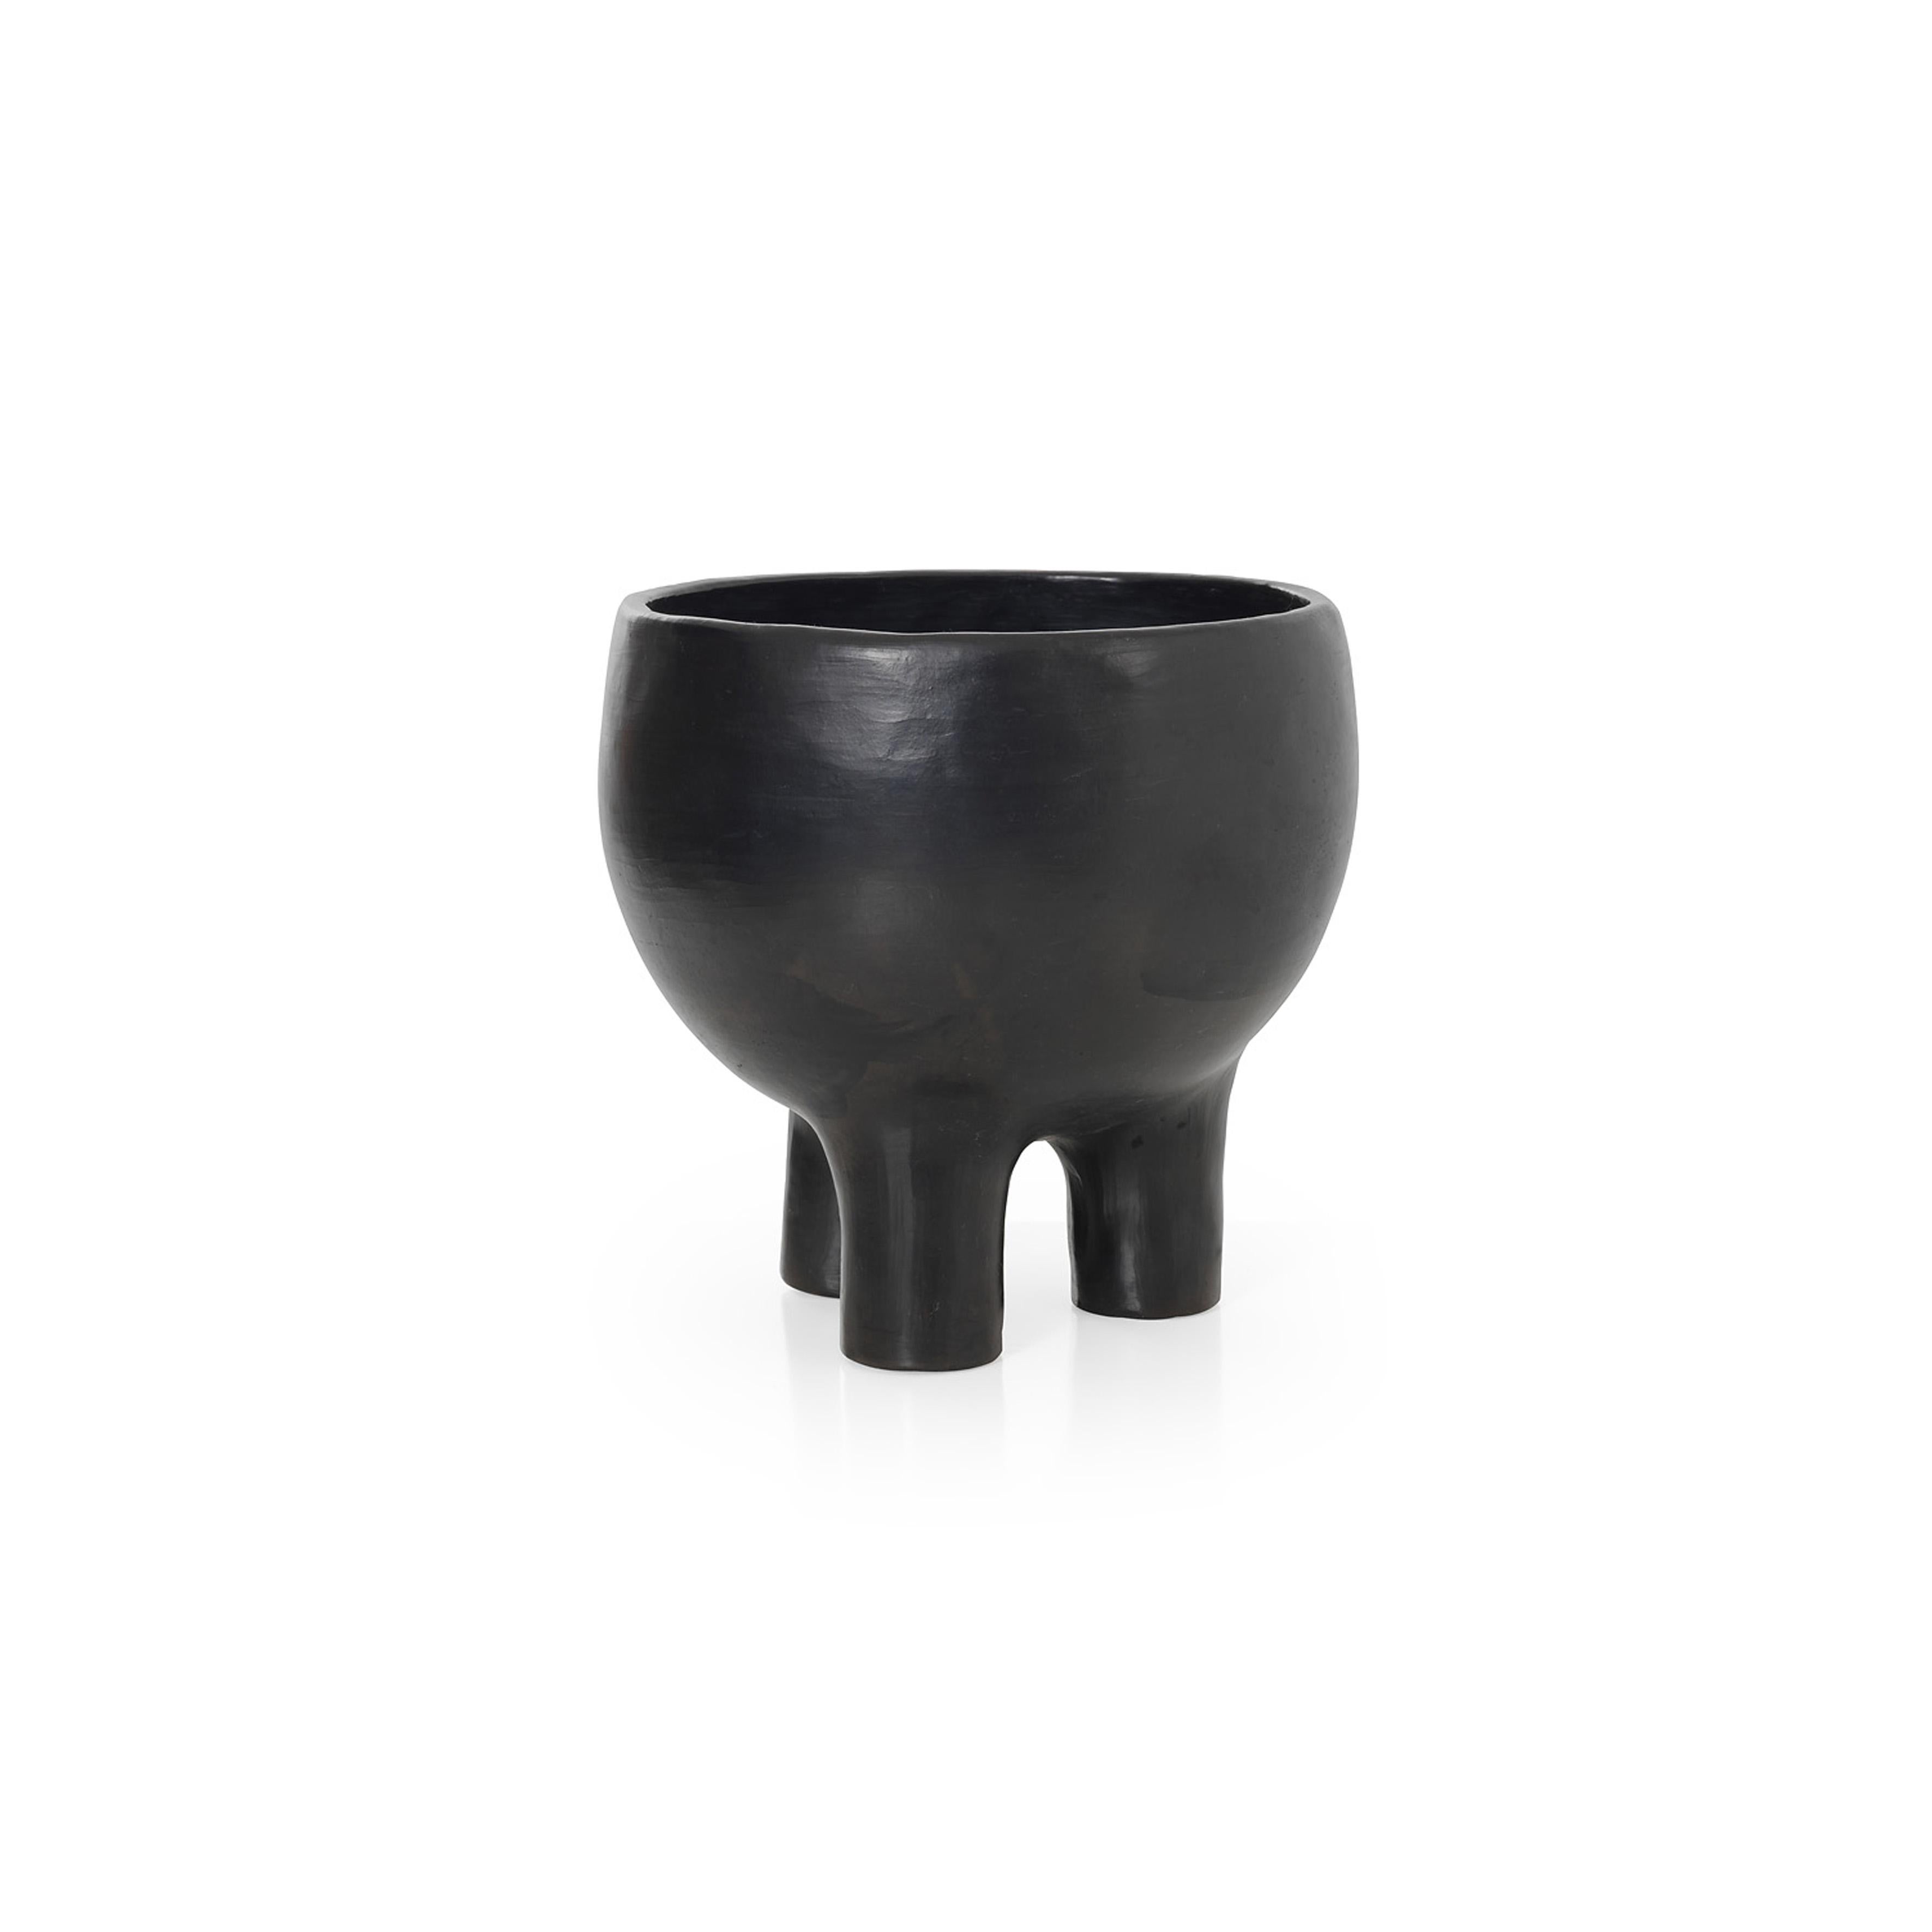 Small pot 2 by Sebastian Herkner
Materials: Heat-resistant black ceramic. 
Technique: Glazed. Oven cooked and polished with semi-precious stones. 
Dimensions: Diameter 30 cm x height 30 cm 
Available in sizes large and mini.

This pot belongs